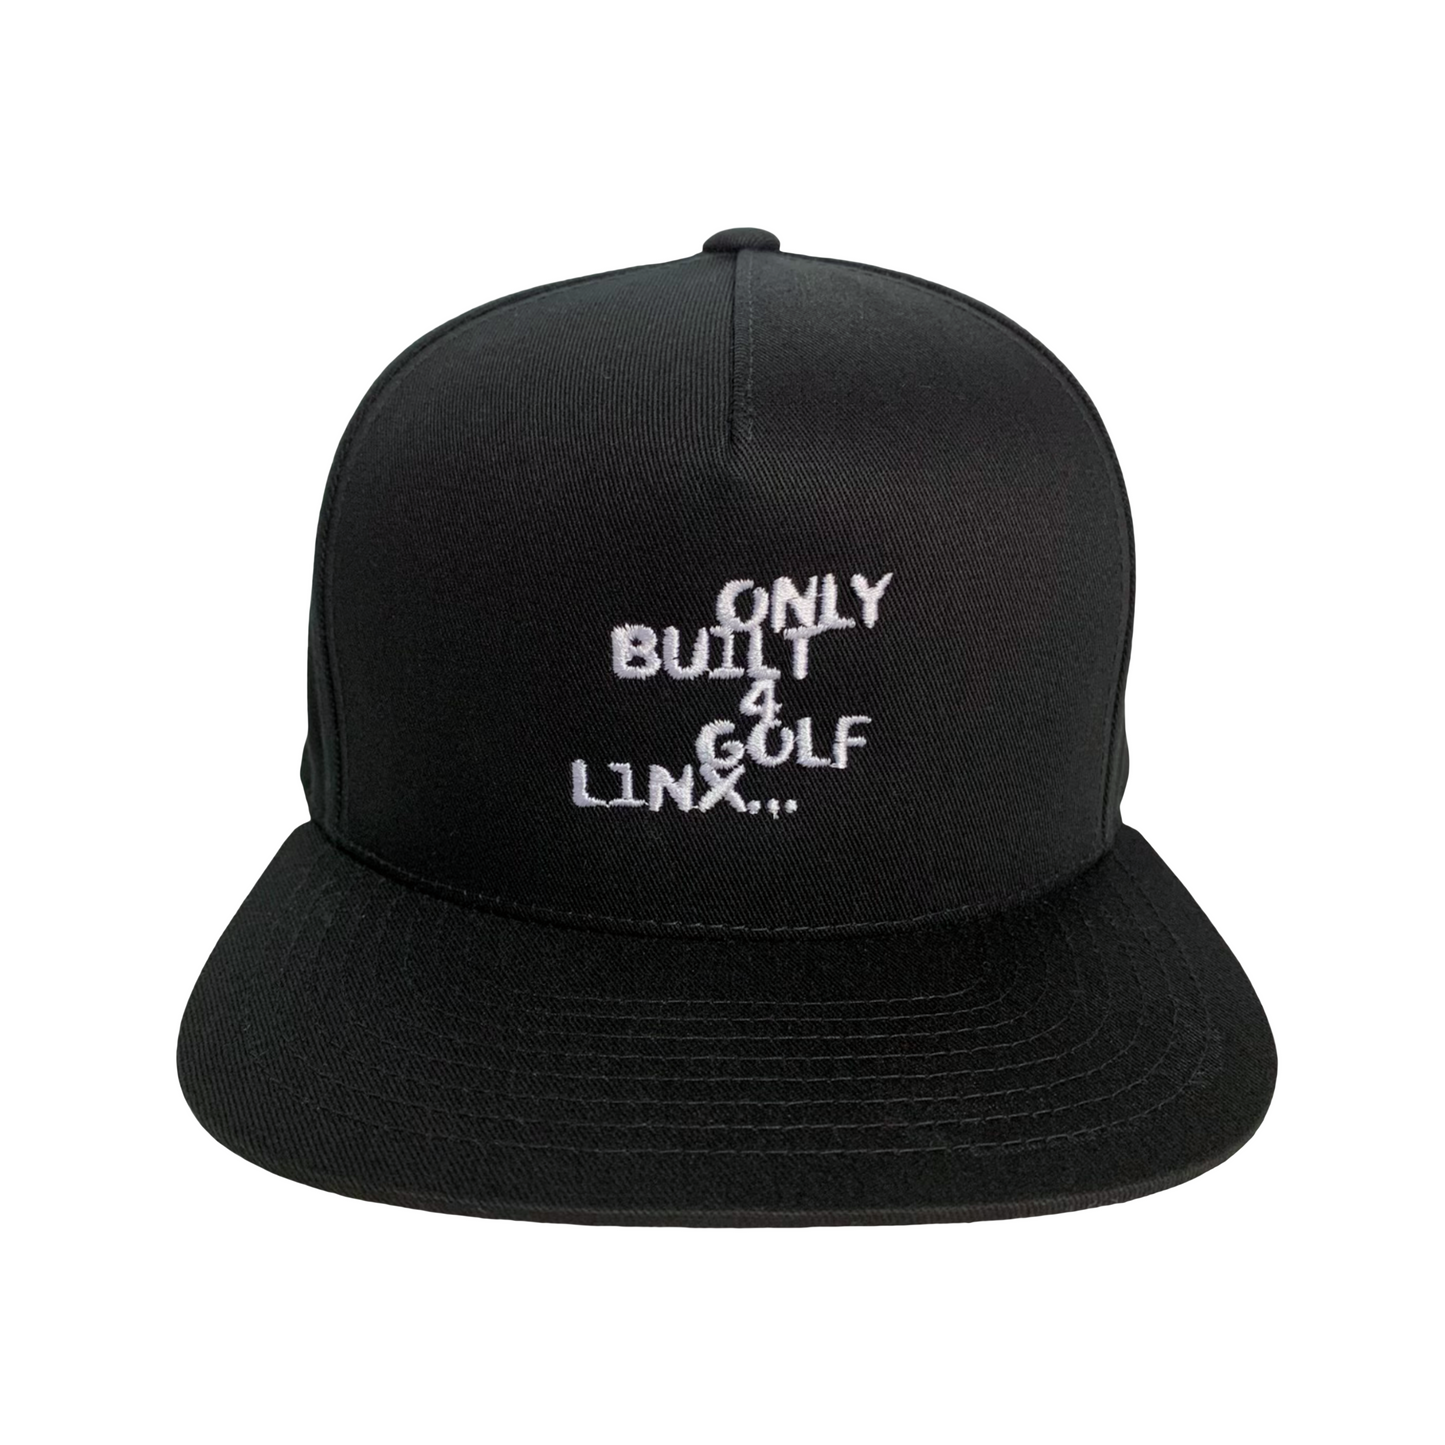 Only Built 4 Golf Linx Snapback Hat